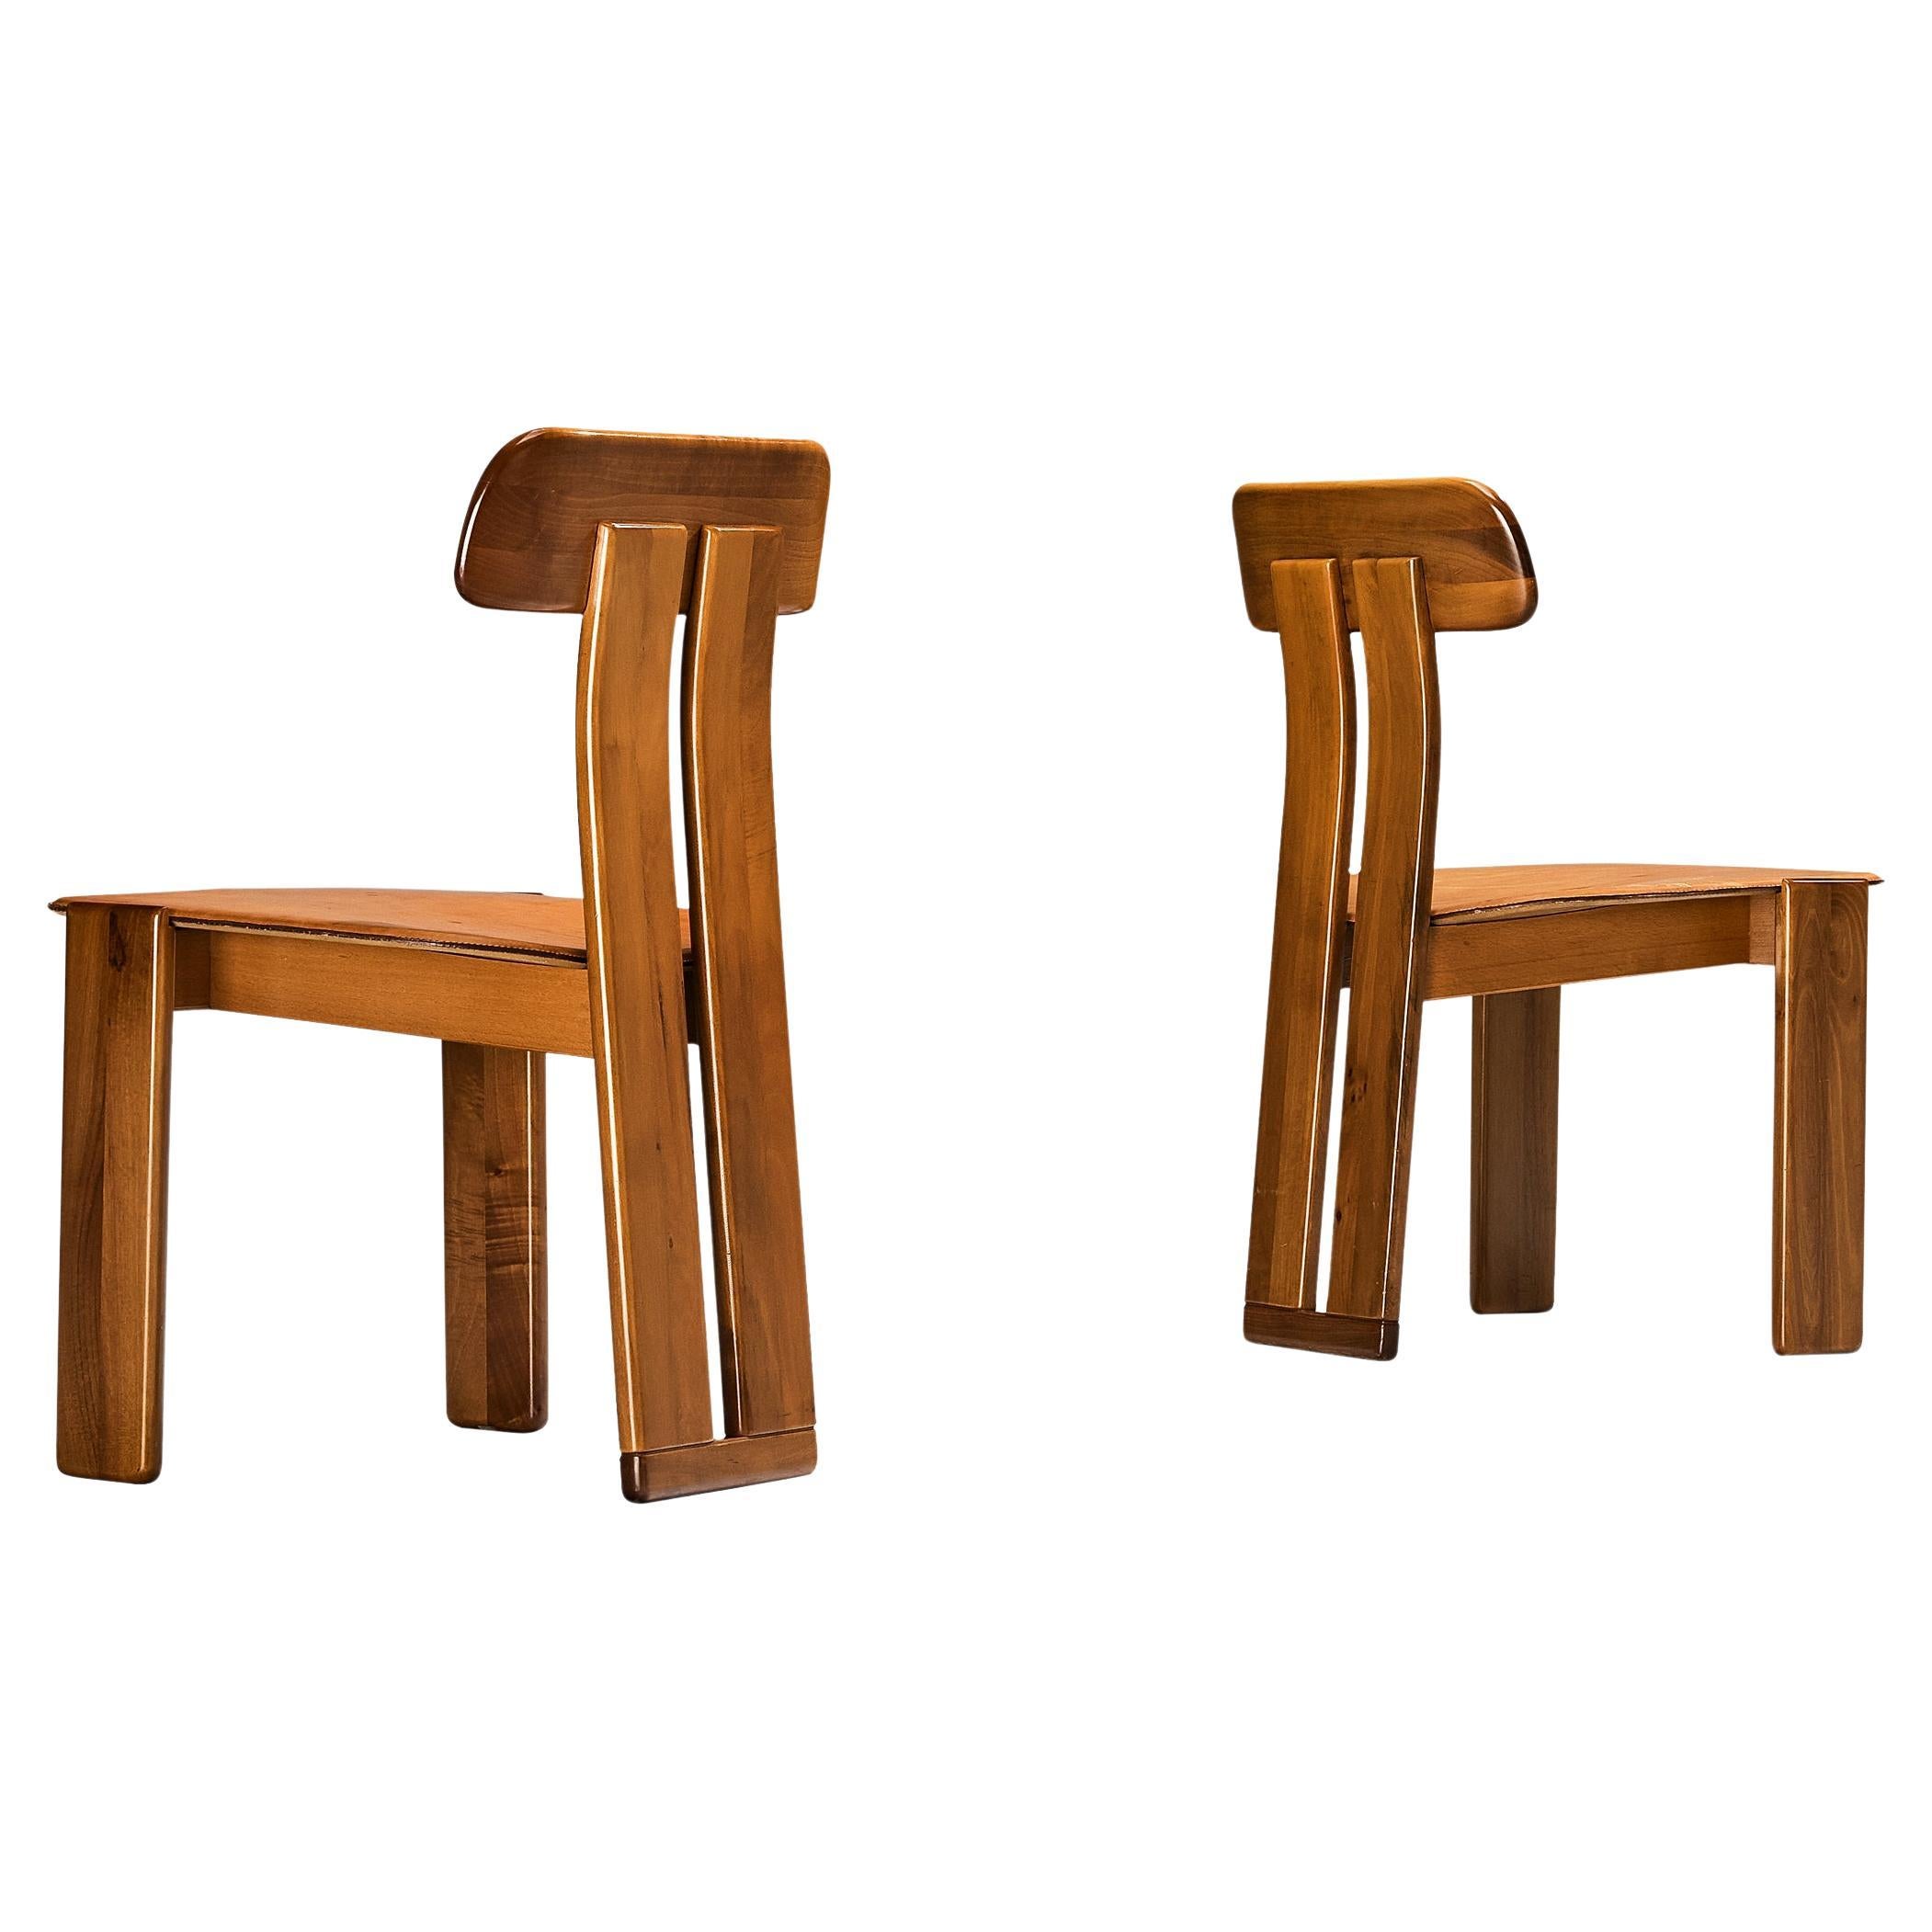 Mario Marenco for Mobil Girgi 'Sapporo' Pair of Dining Chairs in Walnut 